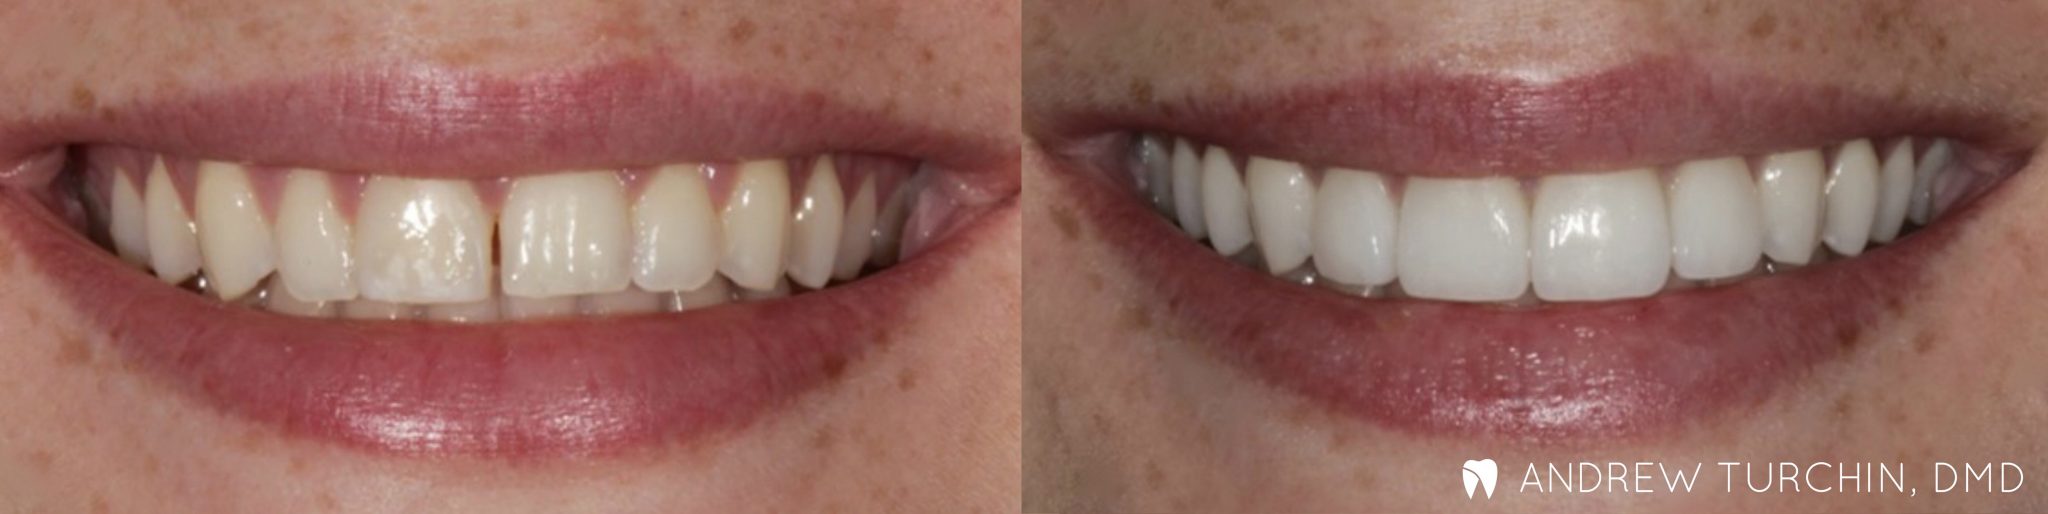 before & after dental photos